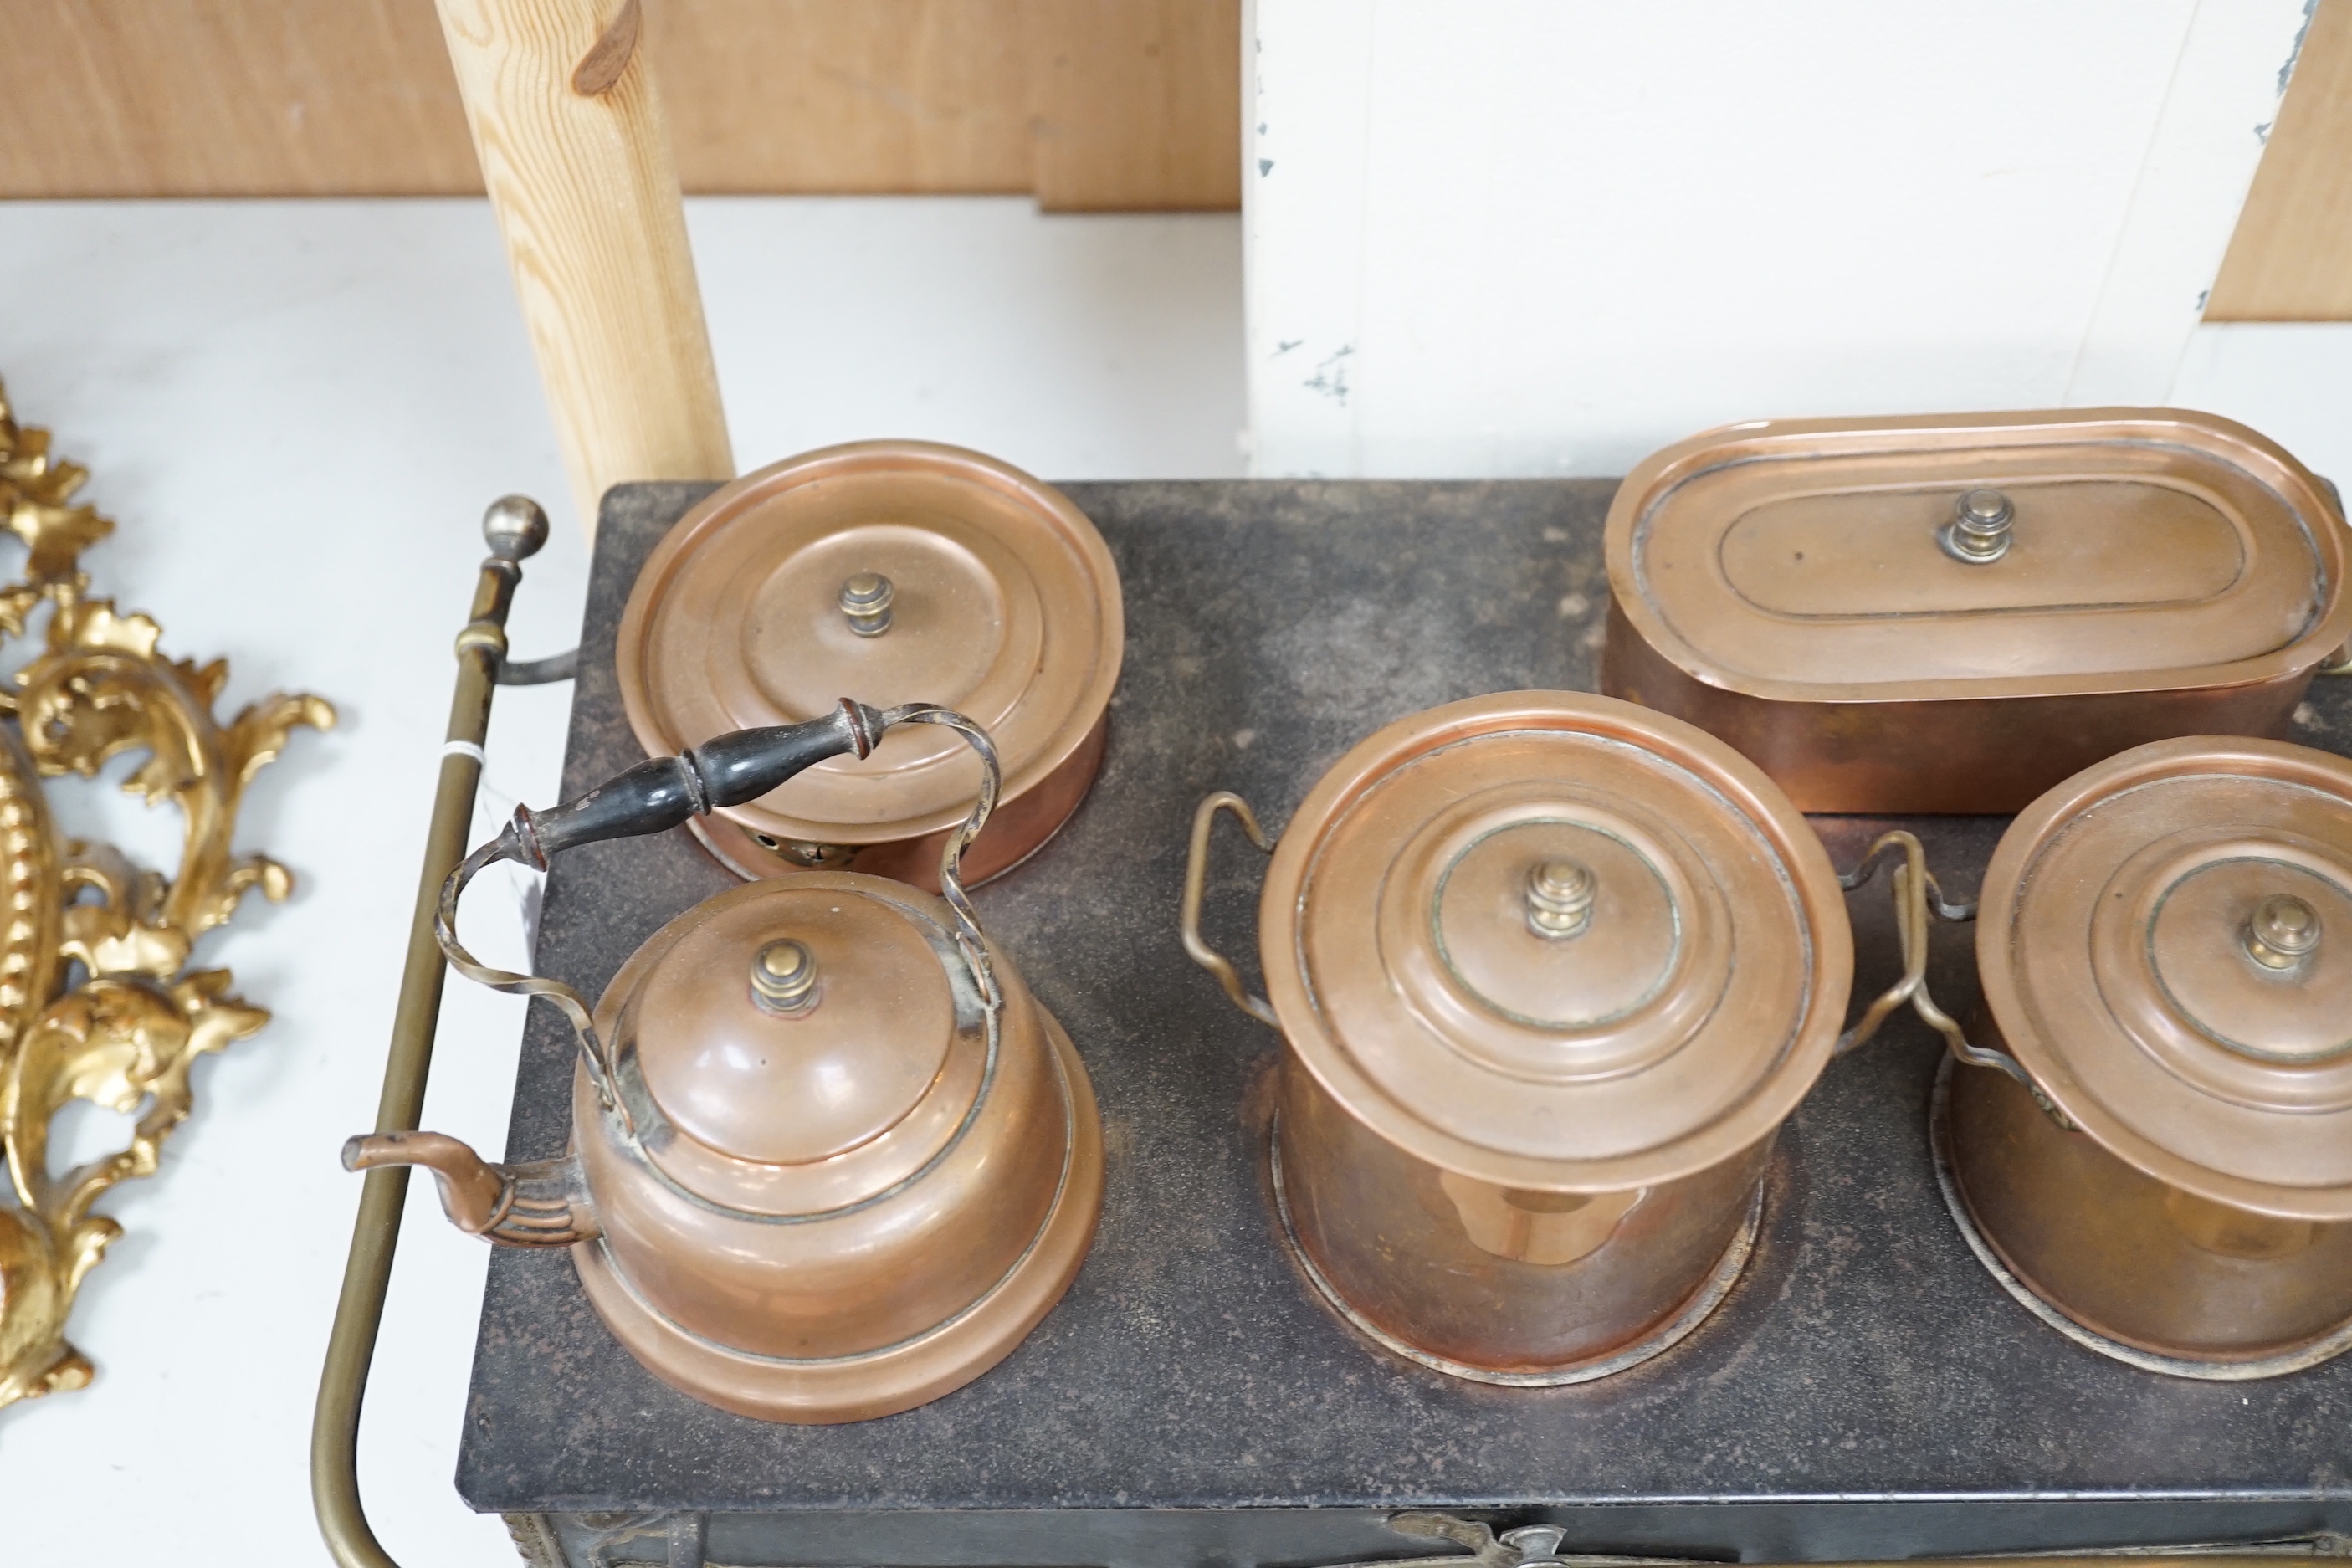 A Continental iron child's toy range/ stove, with a collection of copper fitted pans and a similar kettle, range 46cm wide x 28cm deep x 18.5cm high